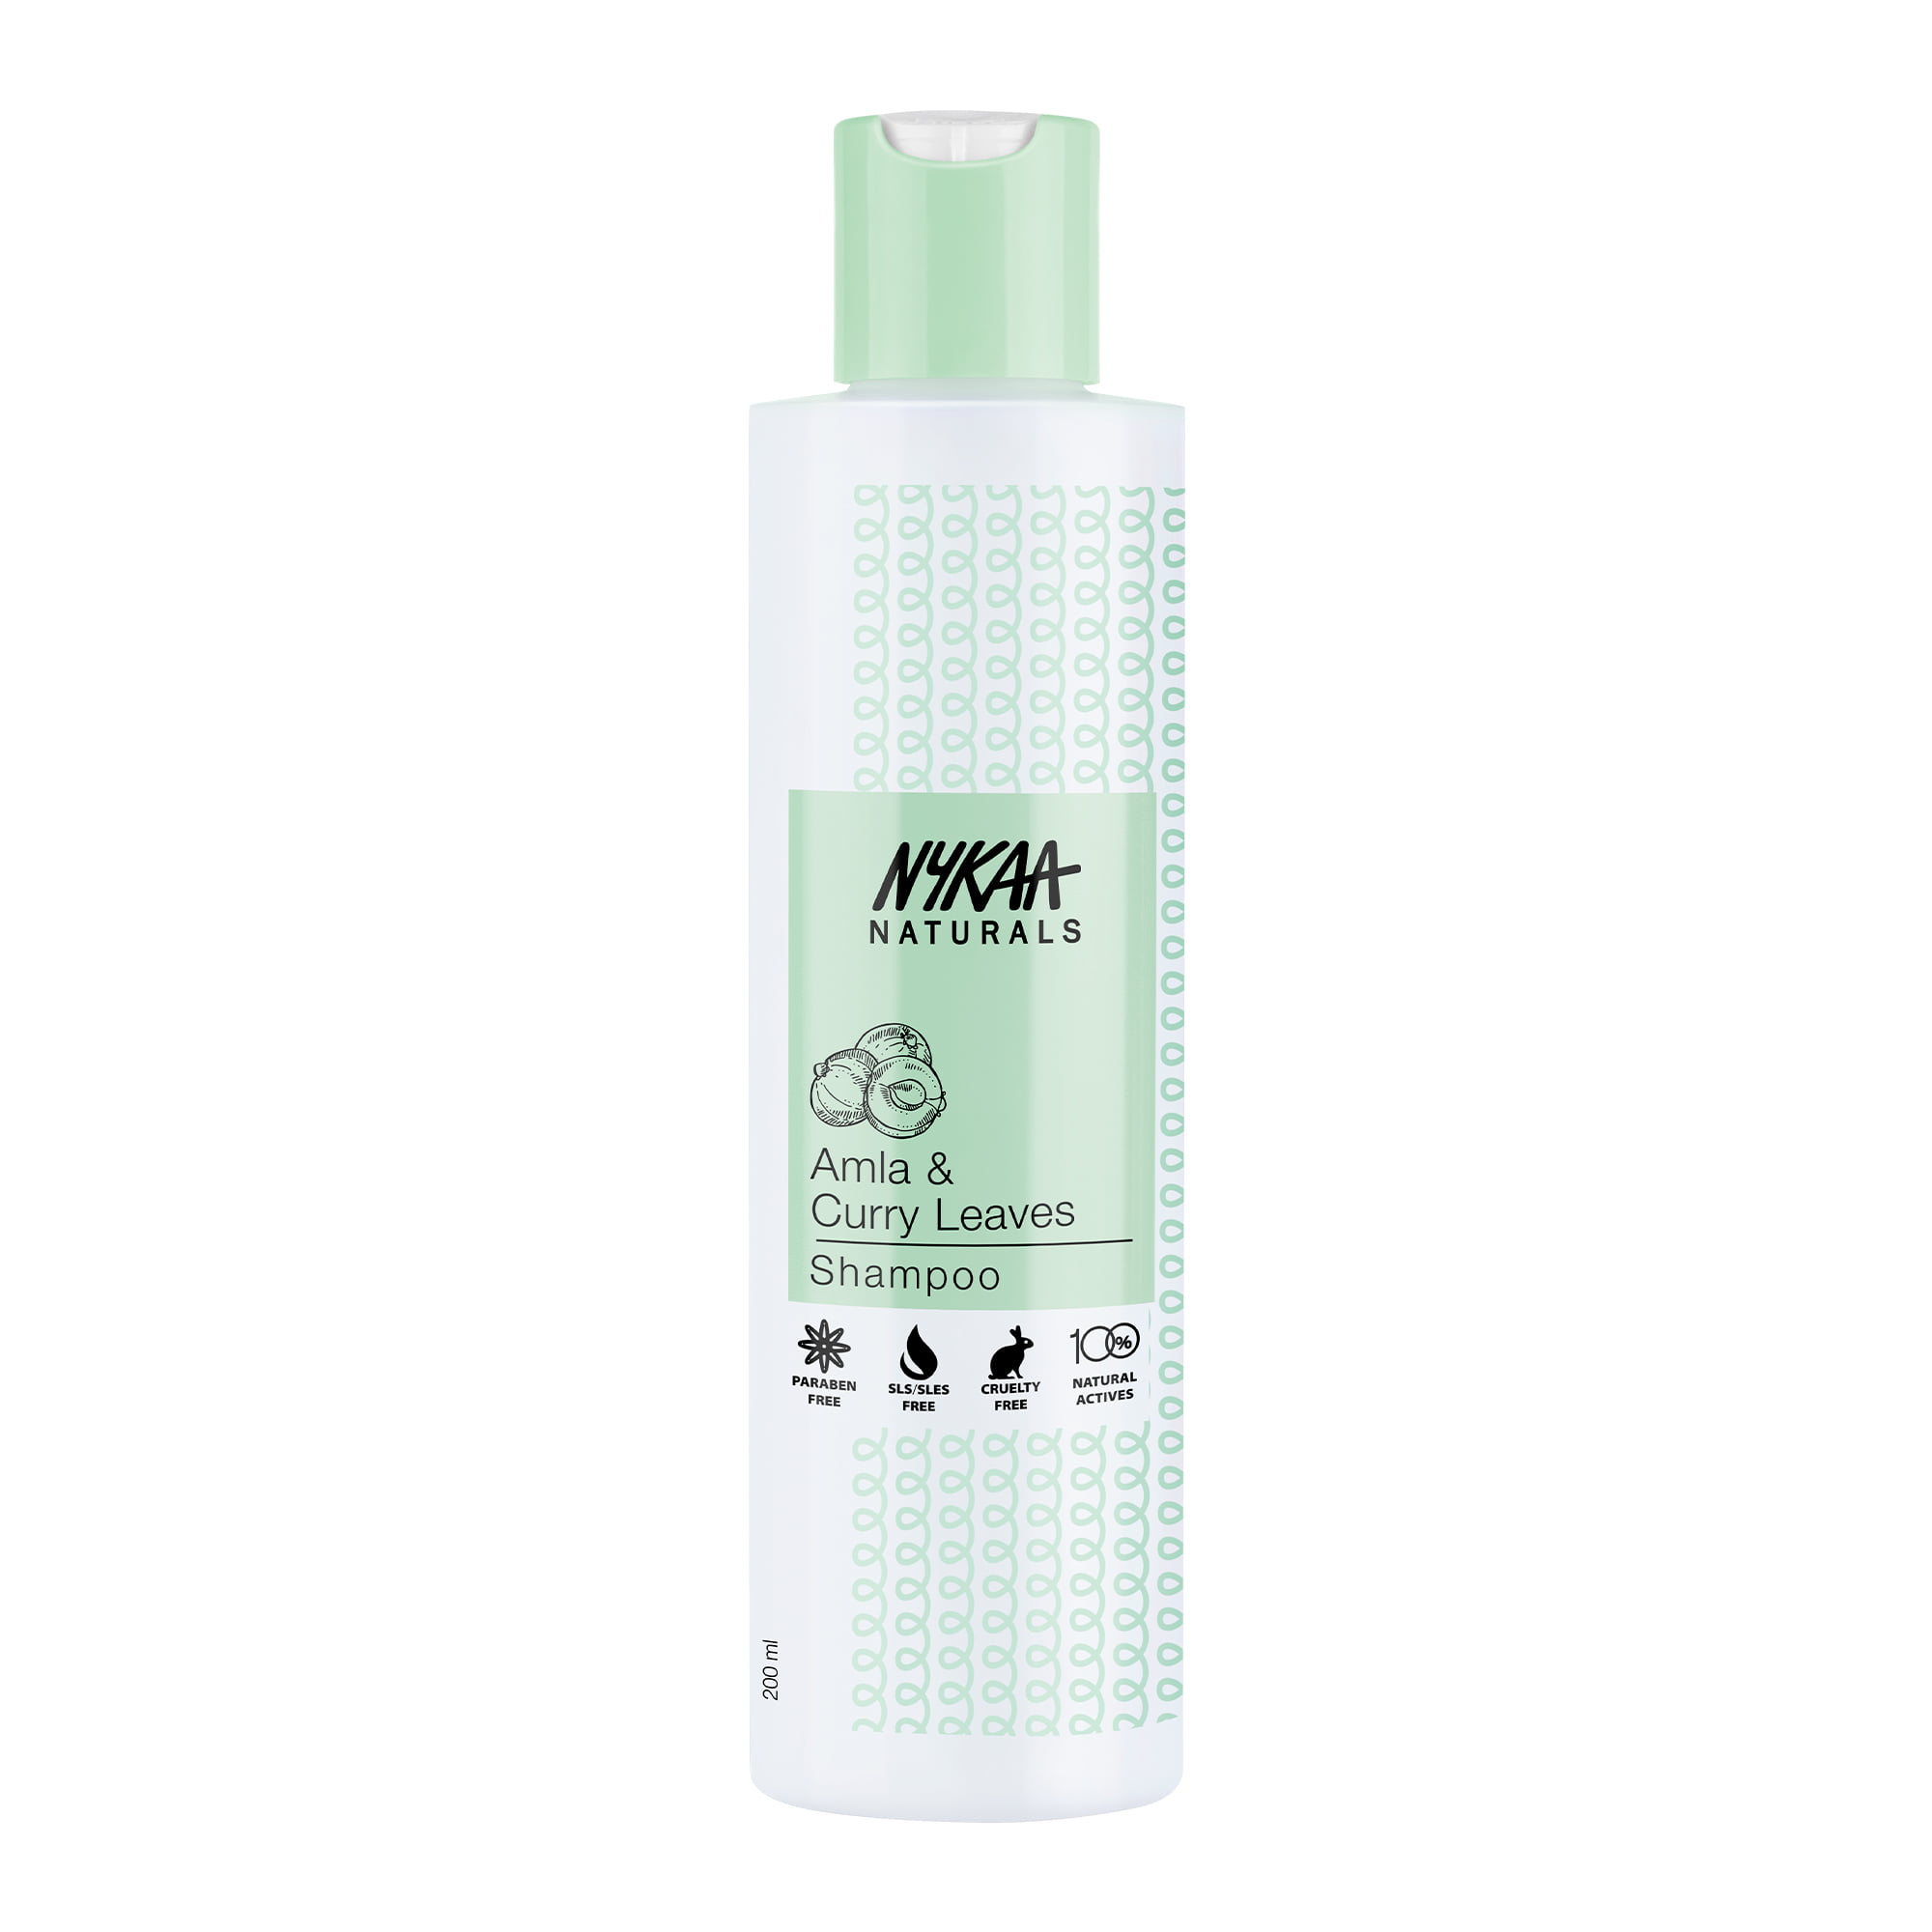 Nykaa Naturals Amla & Curry Leaves Shampoo - Prevents Hair Loss and  Thinning, 100% Natural Actives, Paraben & Sulphate Free, for All Hair Types  - 200ml 